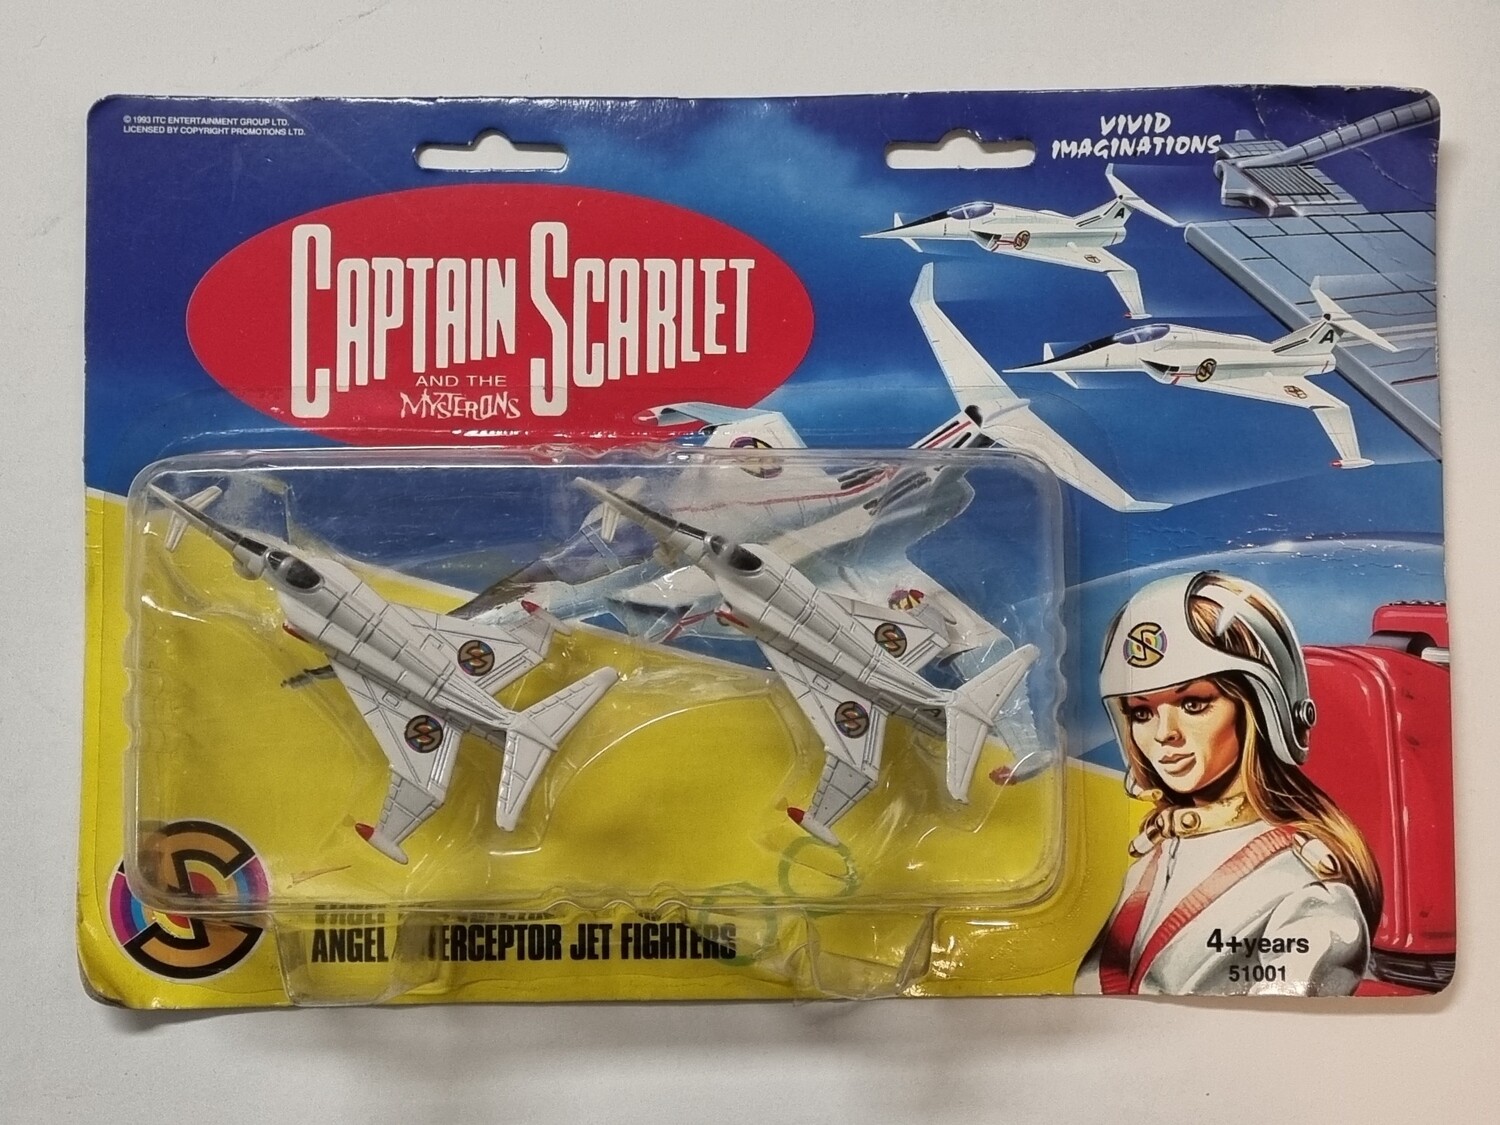 Angel Interceptor Jet Fighters, Captain Scarlet and the Mysterons